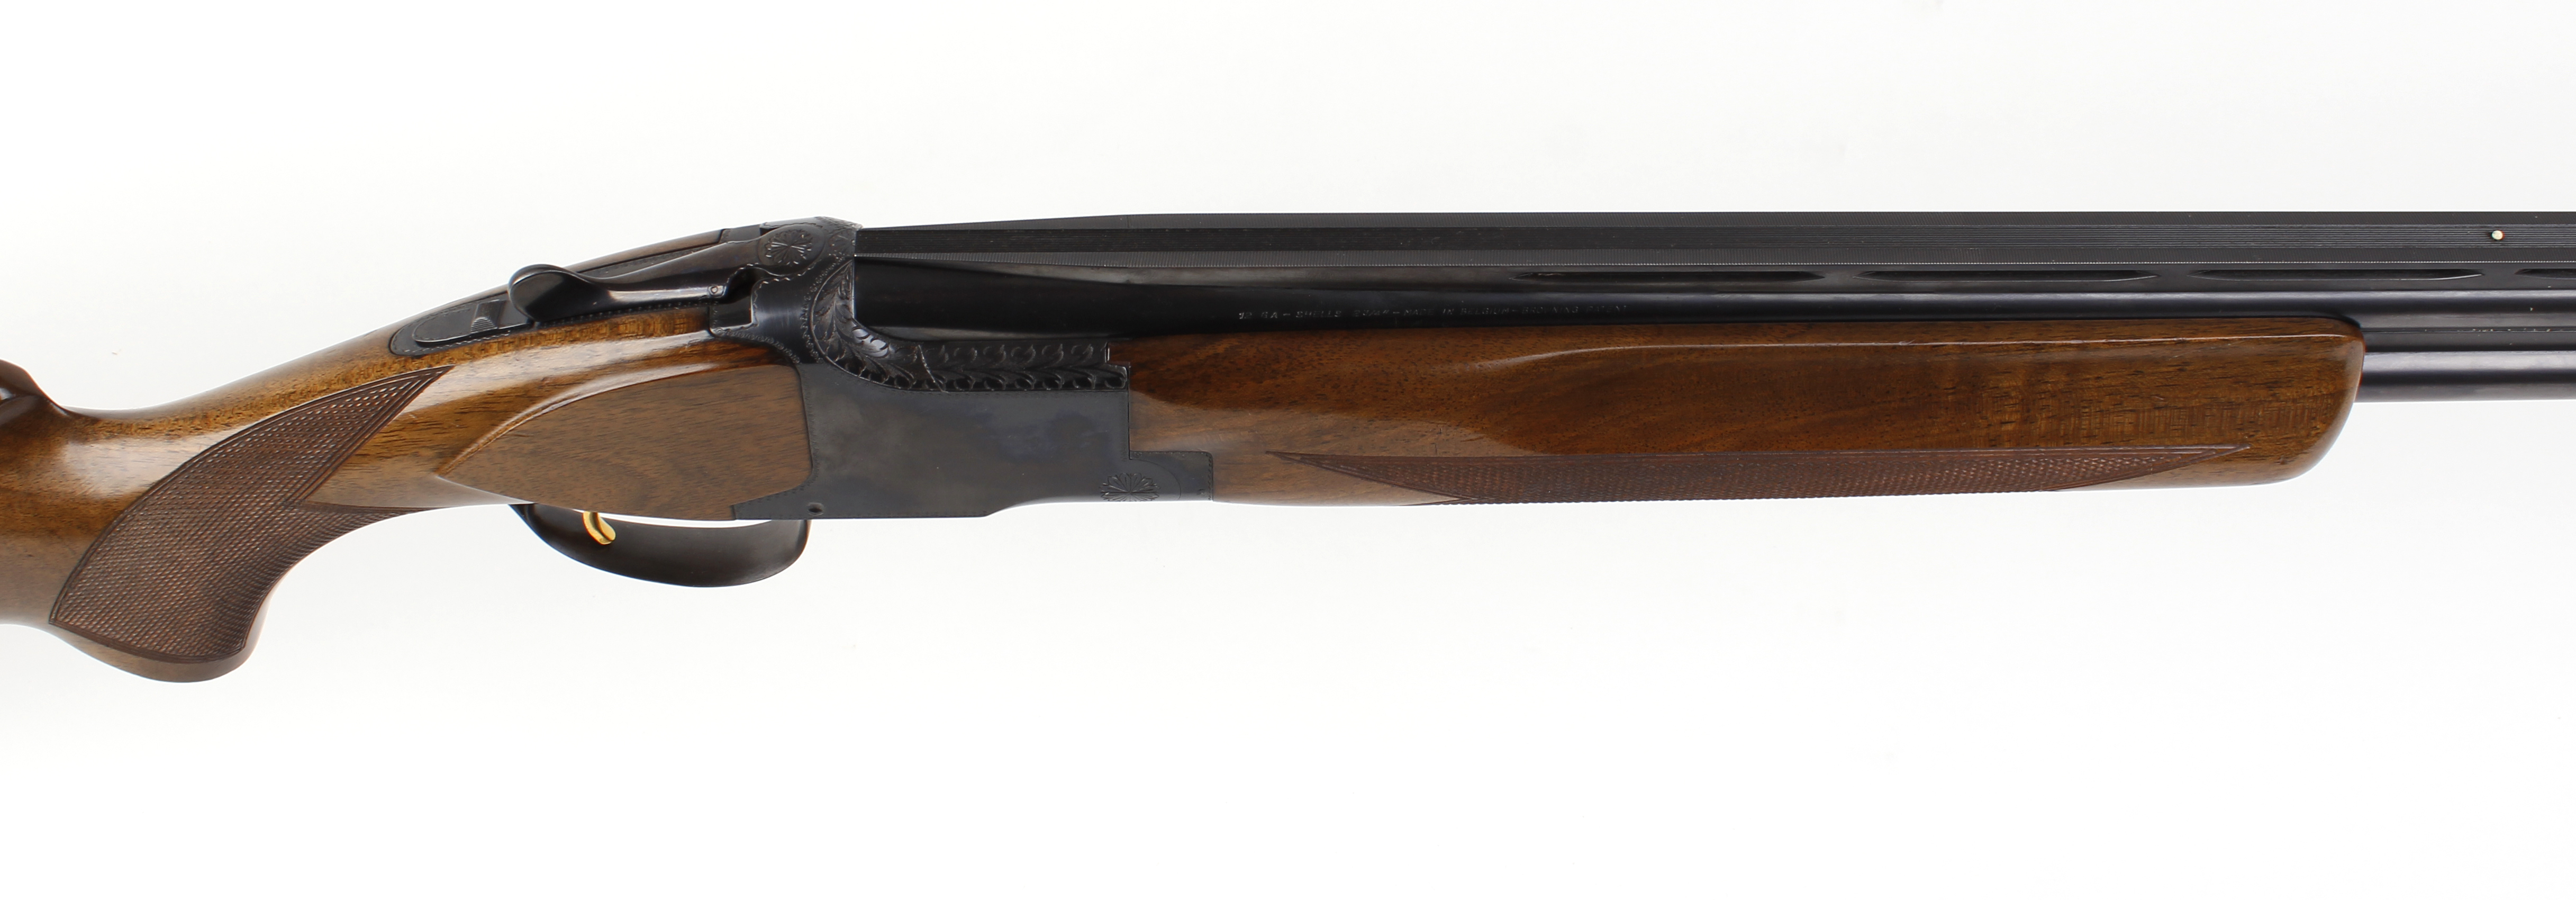 12 bore Browning FN Superposed Trap, over and under, ejector, 29,7/8 ins barrels choked at ¾ & ½, - Image 5 of 7